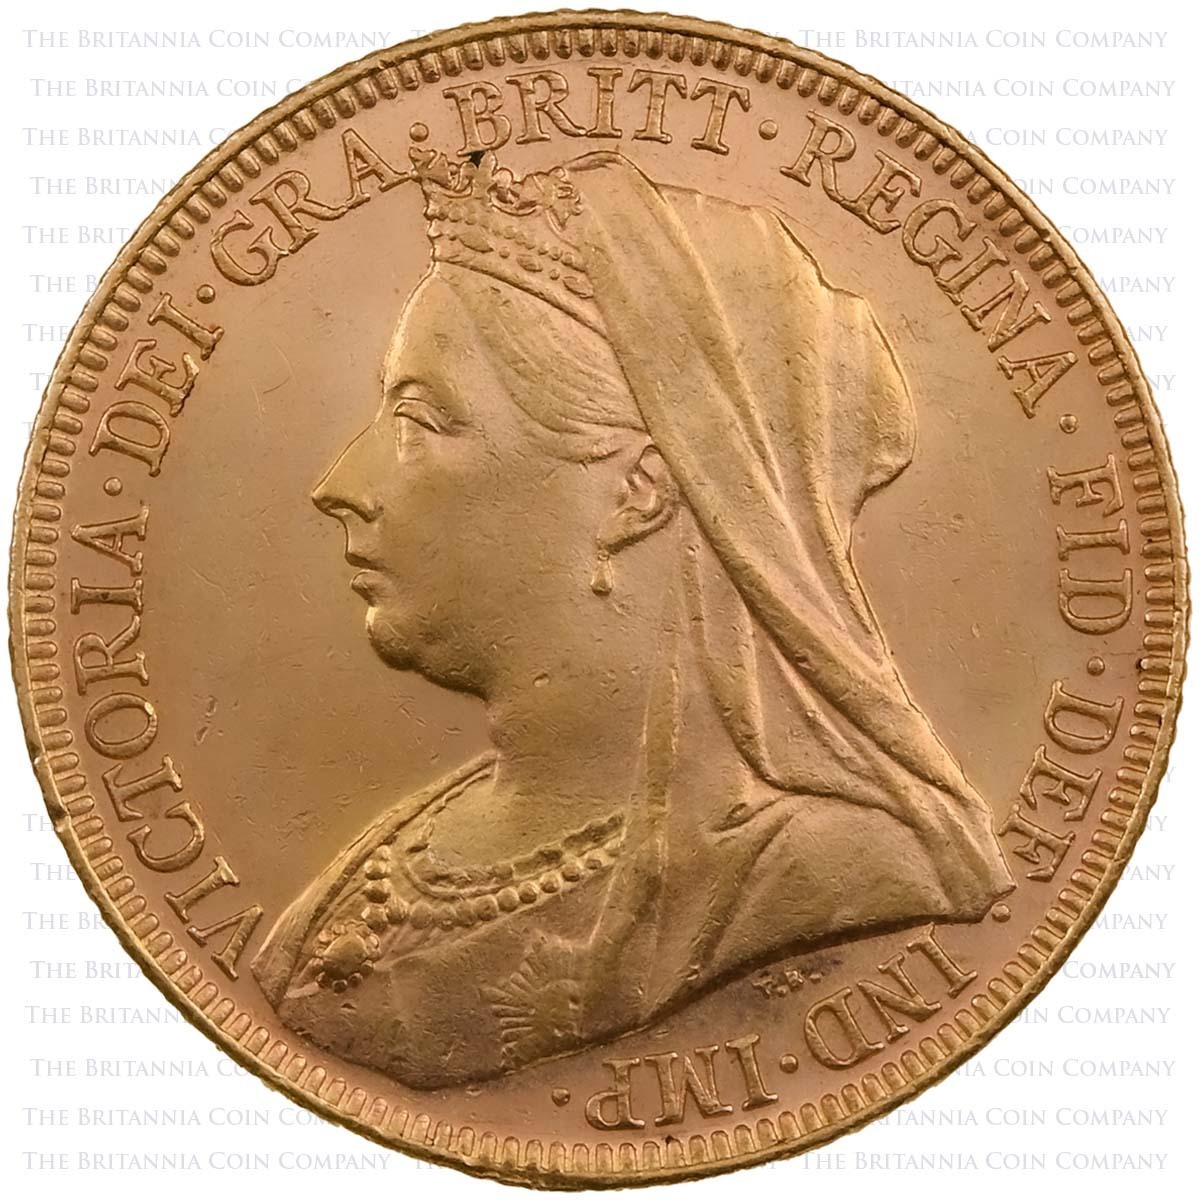 1897 Queen Victoria Gold Full Sovereign Coin Old Veiled Widowed Head Melbourne Australia Mint Obverse